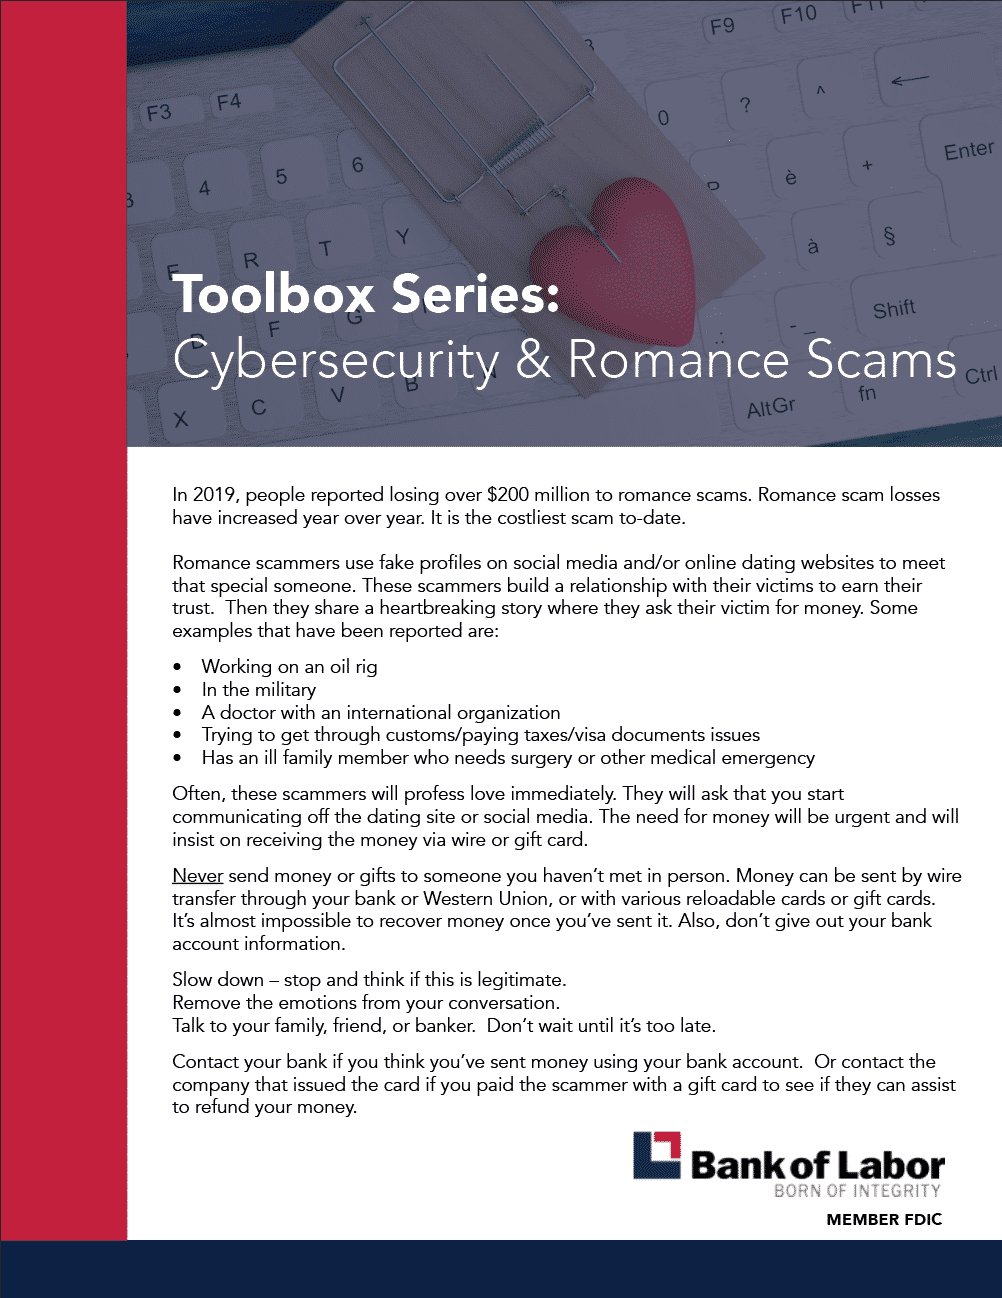 Cyber Security and Romance Scams